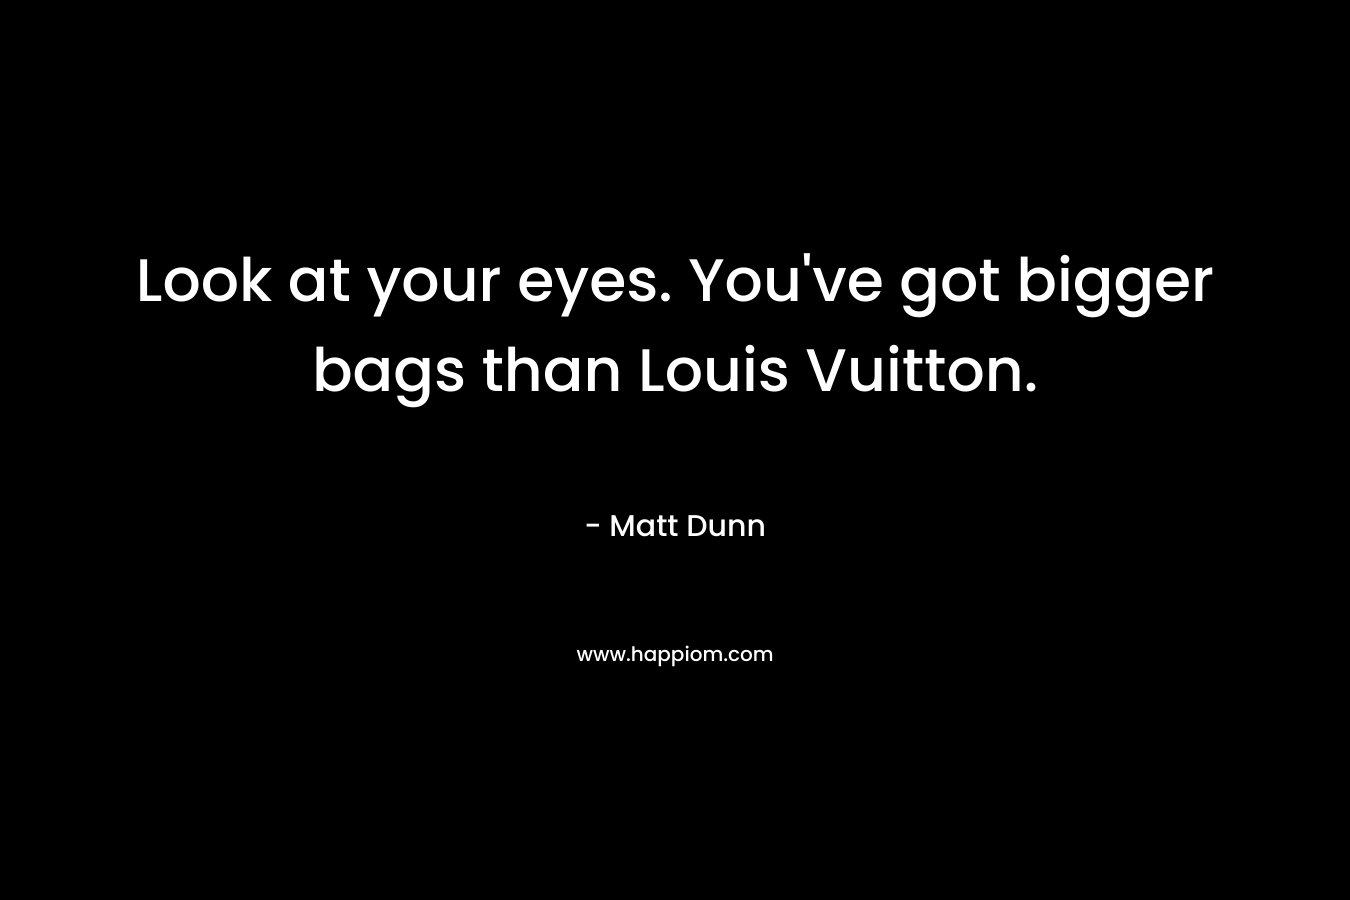 Look at your eyes. You've got bigger bags than Louis Vuitton.